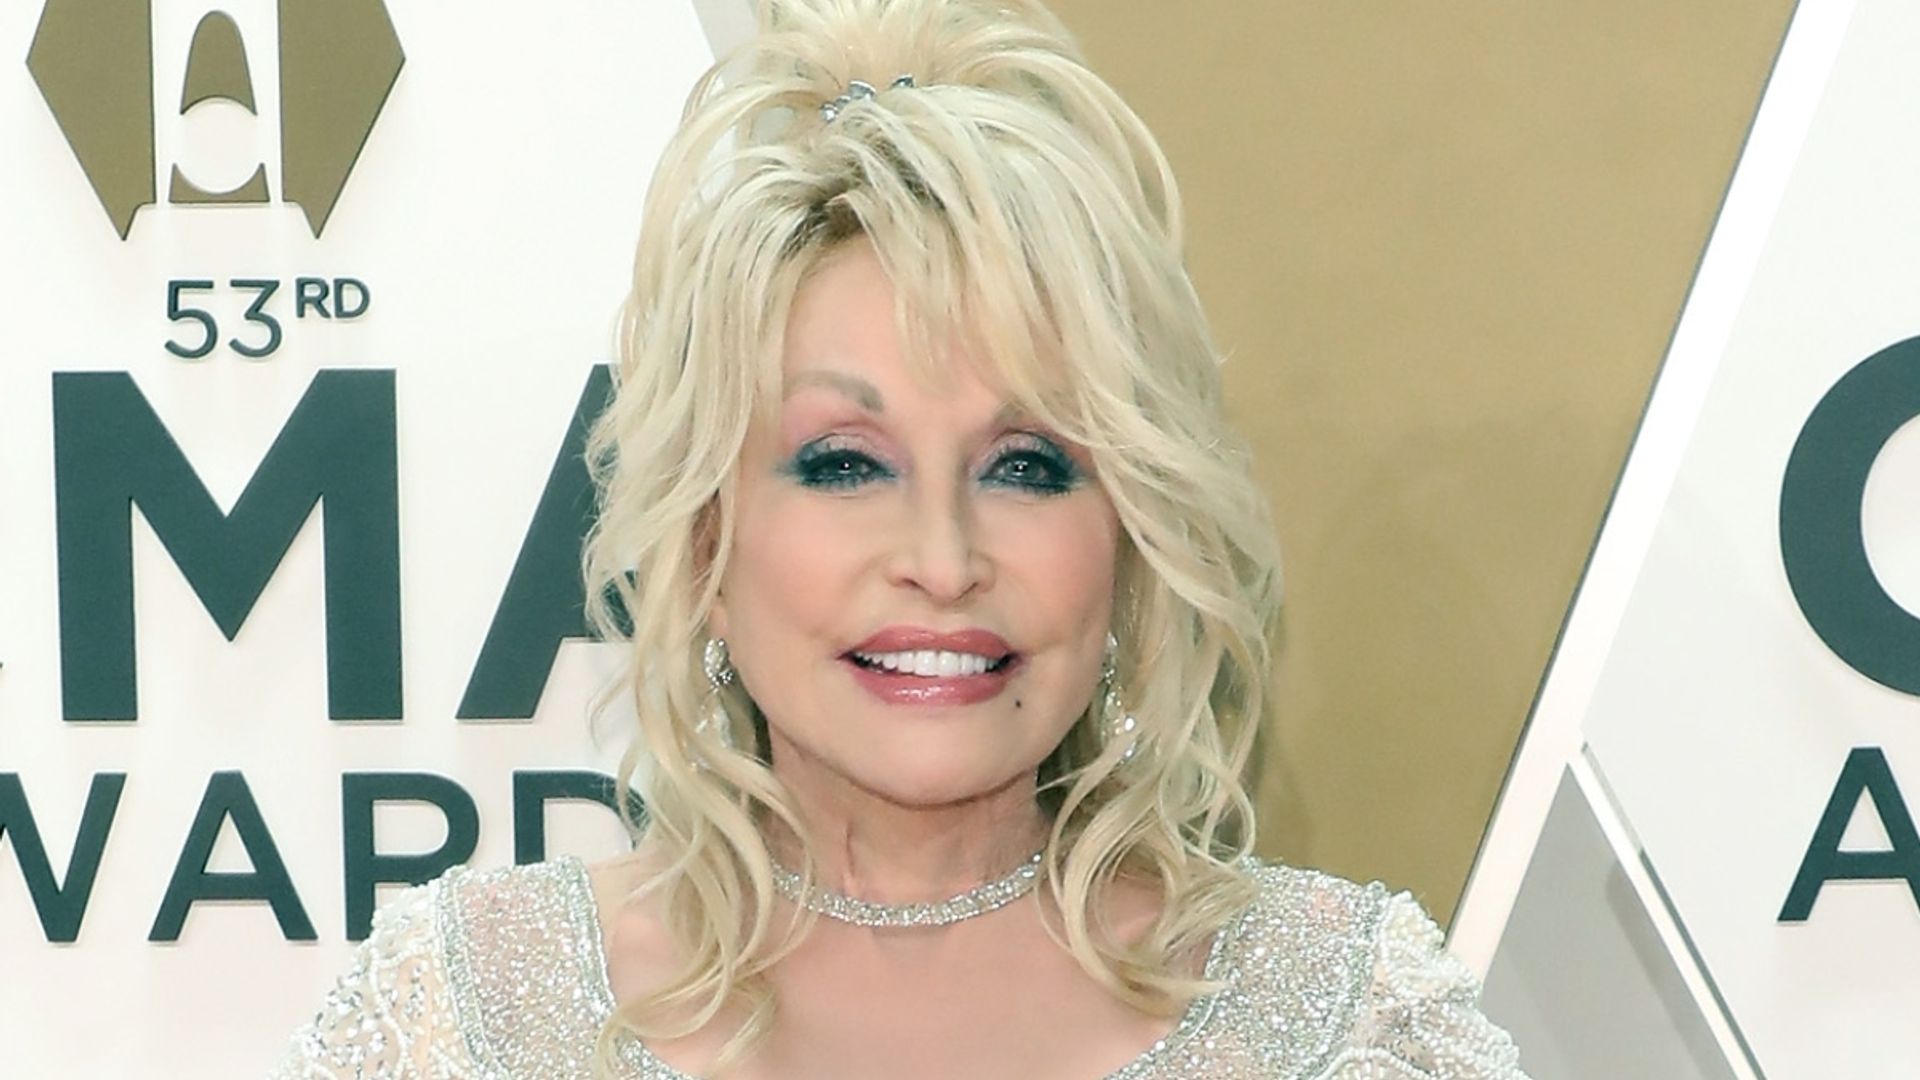 Dolly Parton announces new music - and gets an unexpected reaction